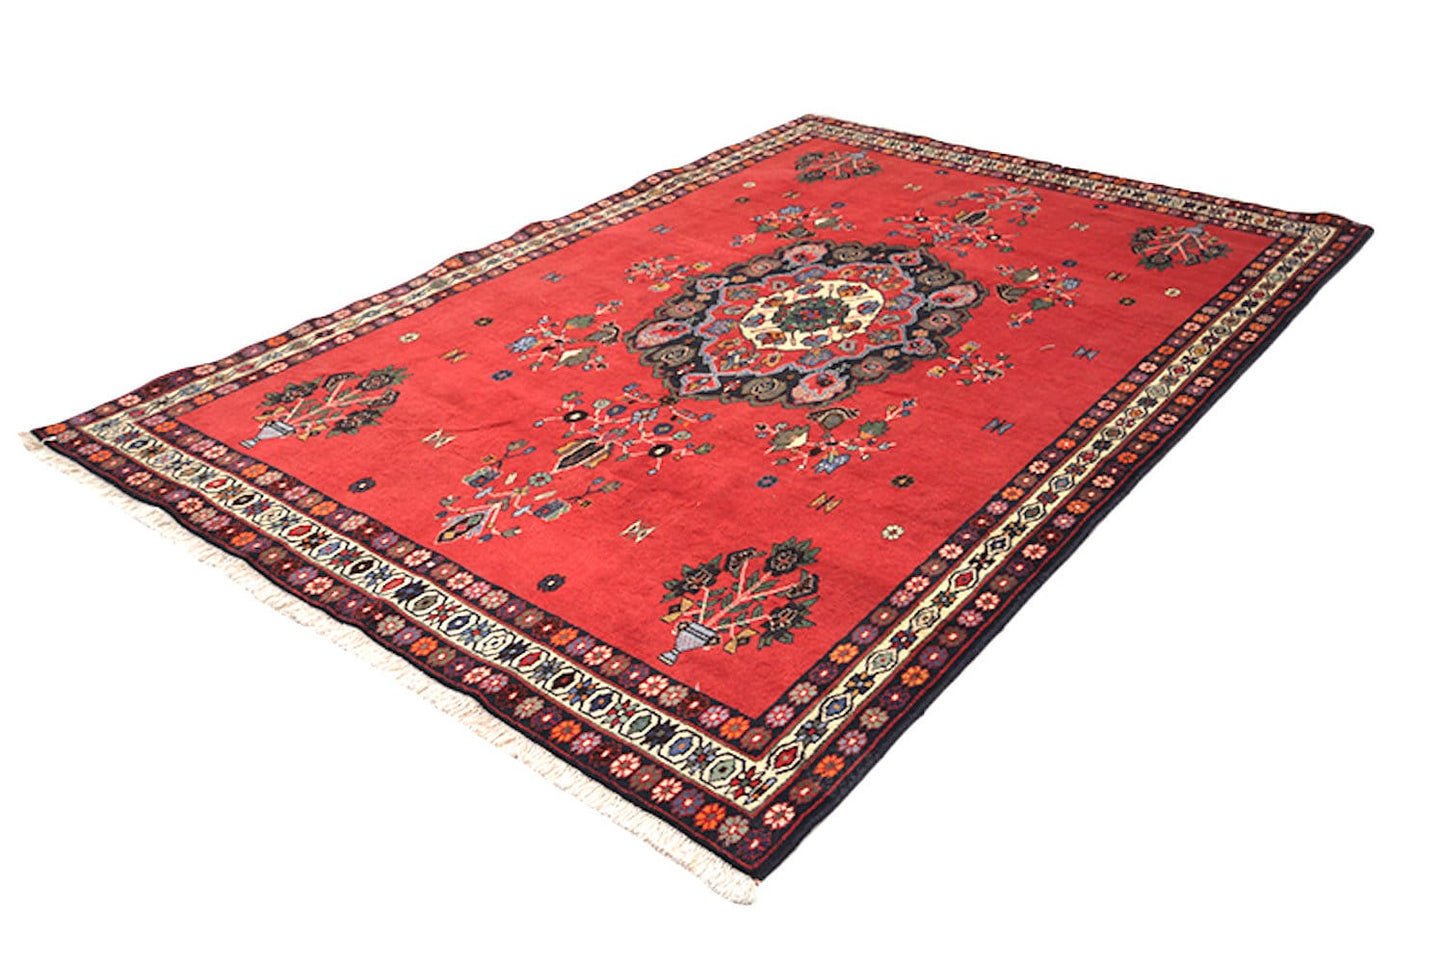 8.3 x 5.6 Feet | Bright Vintage Red Rug | Antique Rug | Hand Knotted Area Rug | Persian Style Medallion | Wool Antique Rug